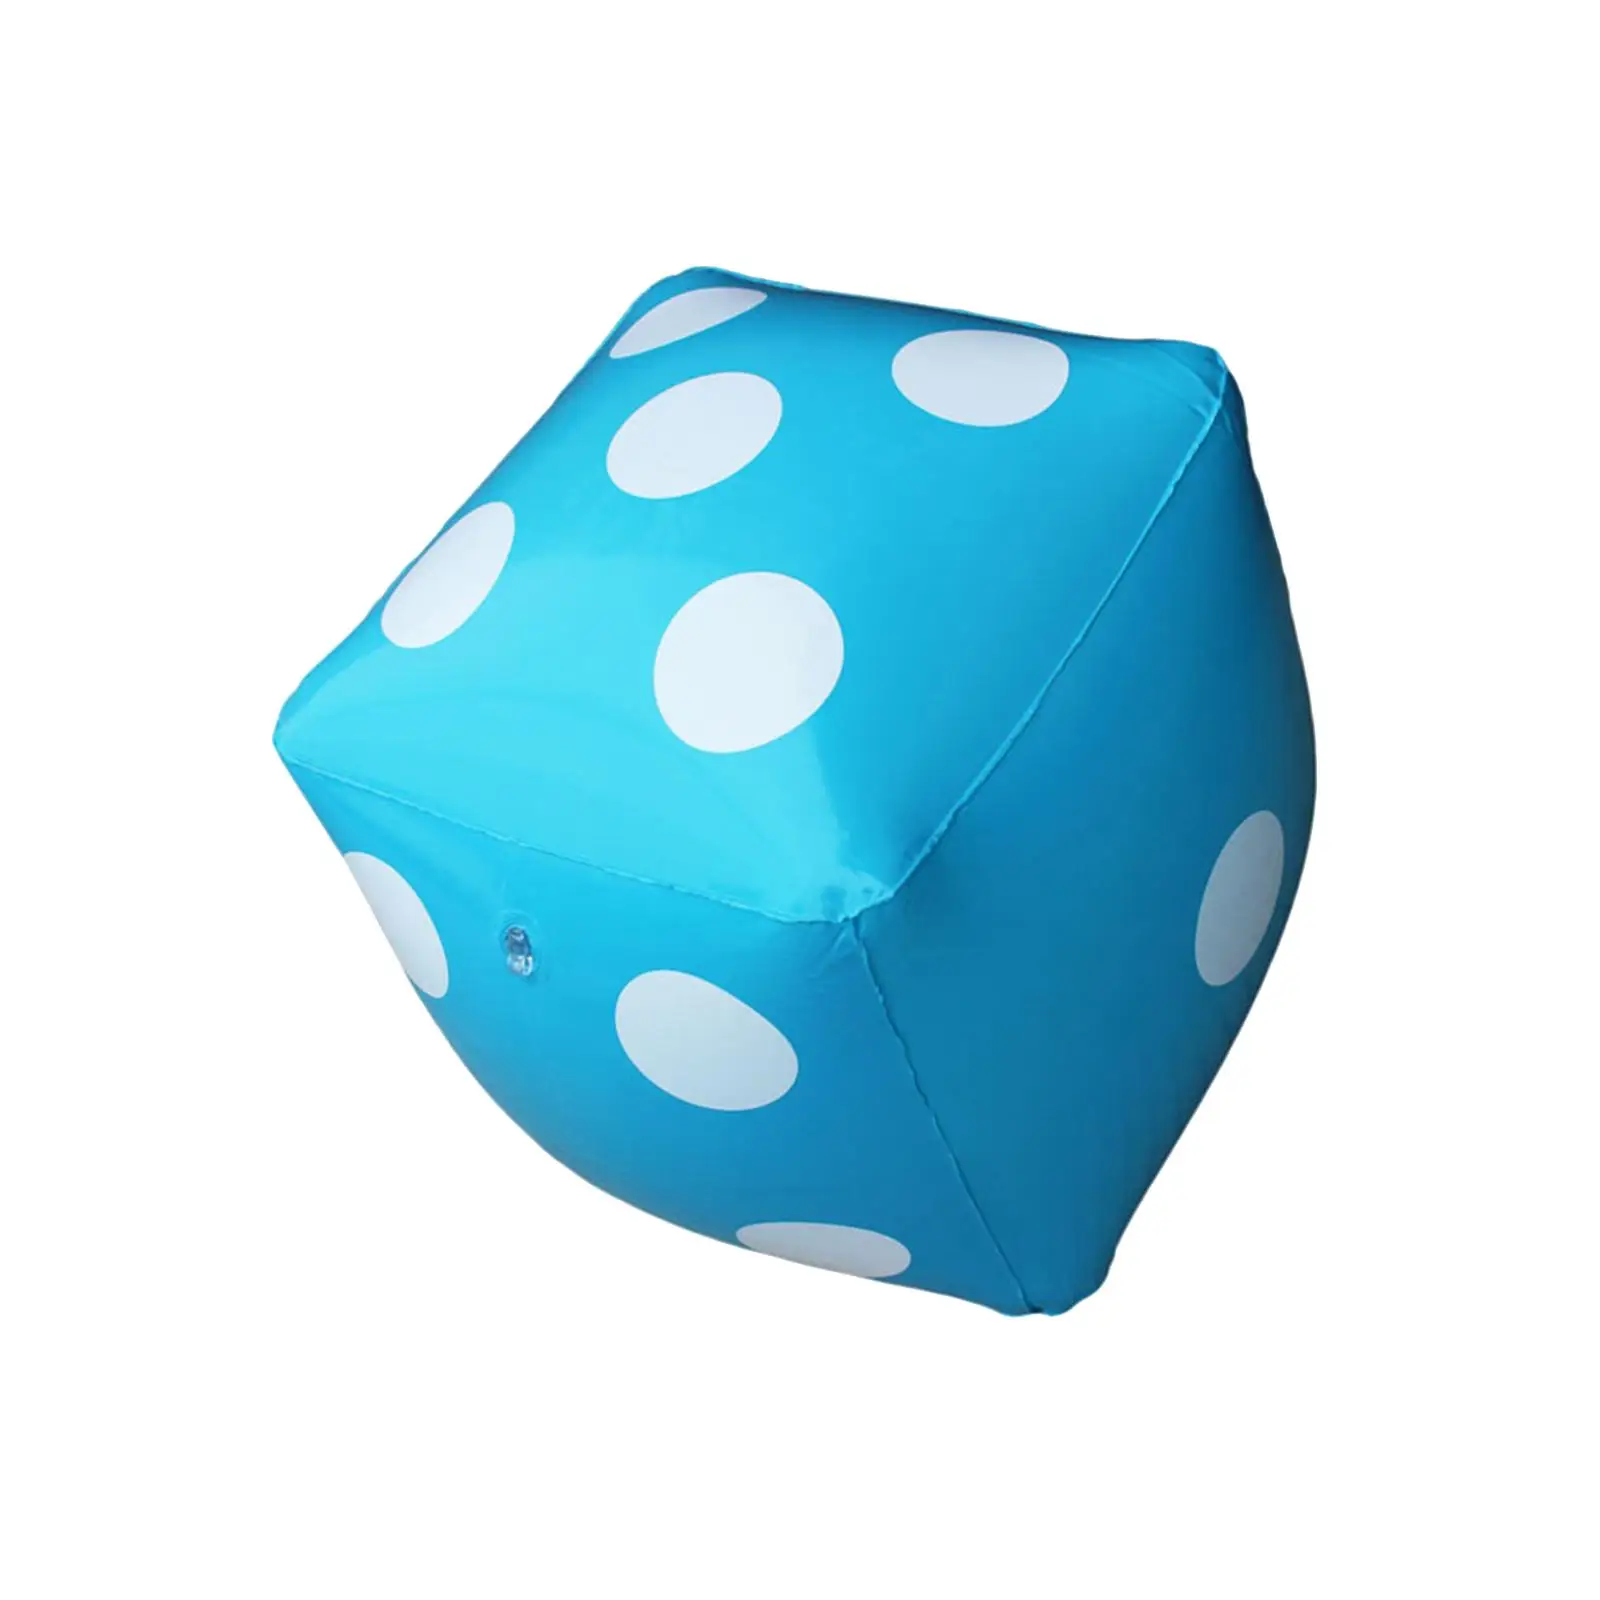 Giant Inflatable Dice, Swimming Pool Dices, 60cmx60cm, Funny Jumbo Inflatable Dice for Indoor Outdoor Game